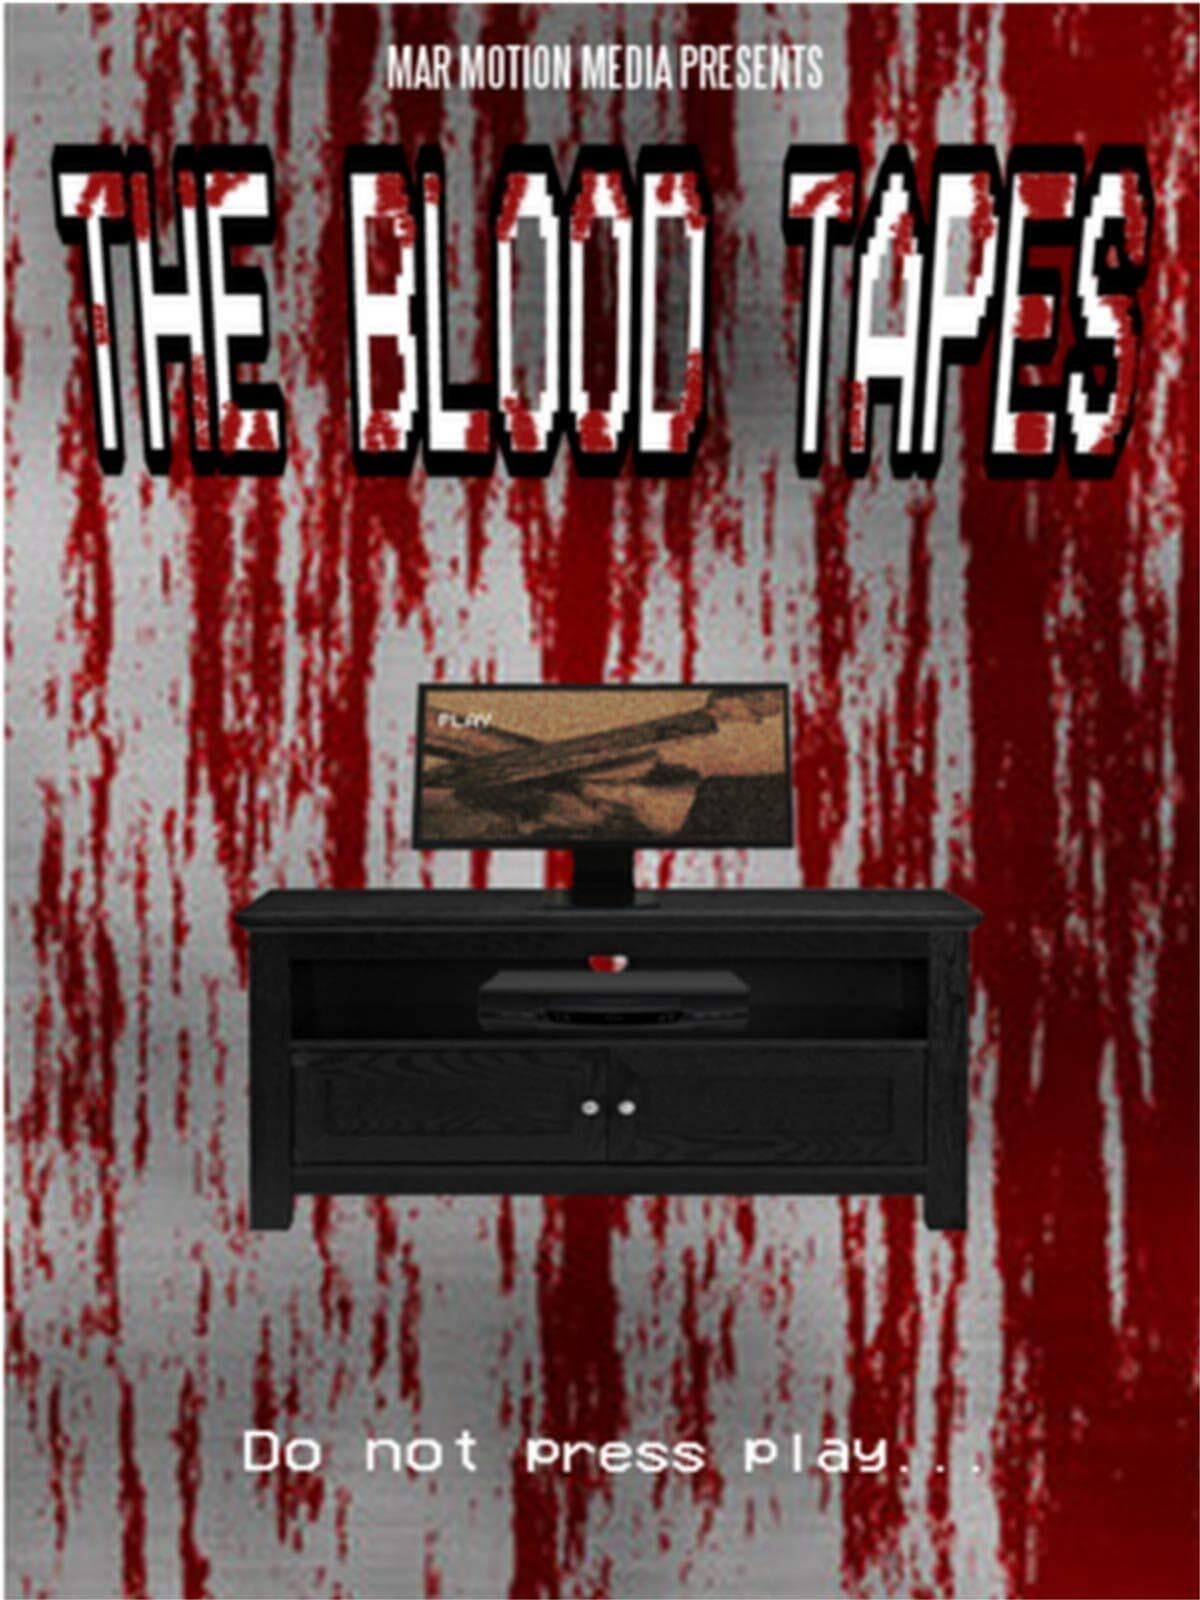 The Blood Tapes